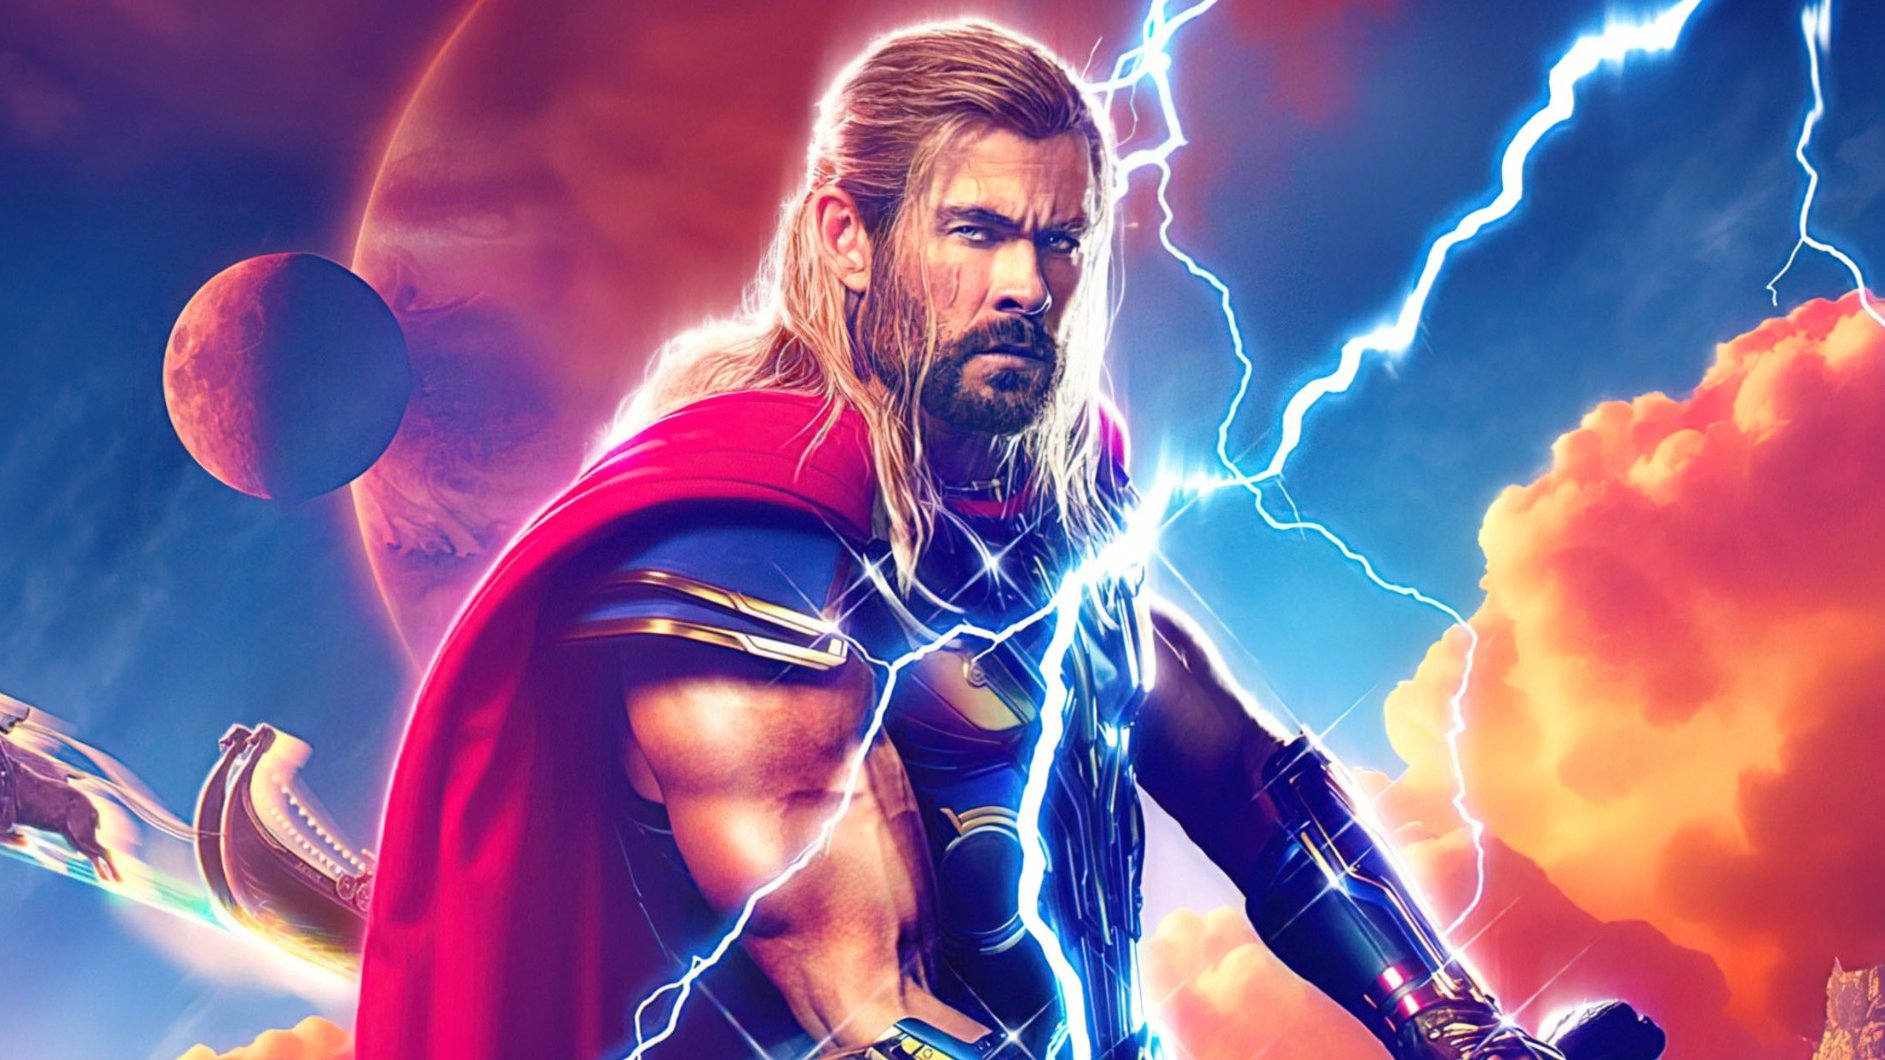 Rotten Tomatoes - The first reviews are in for 'Thor: Love and